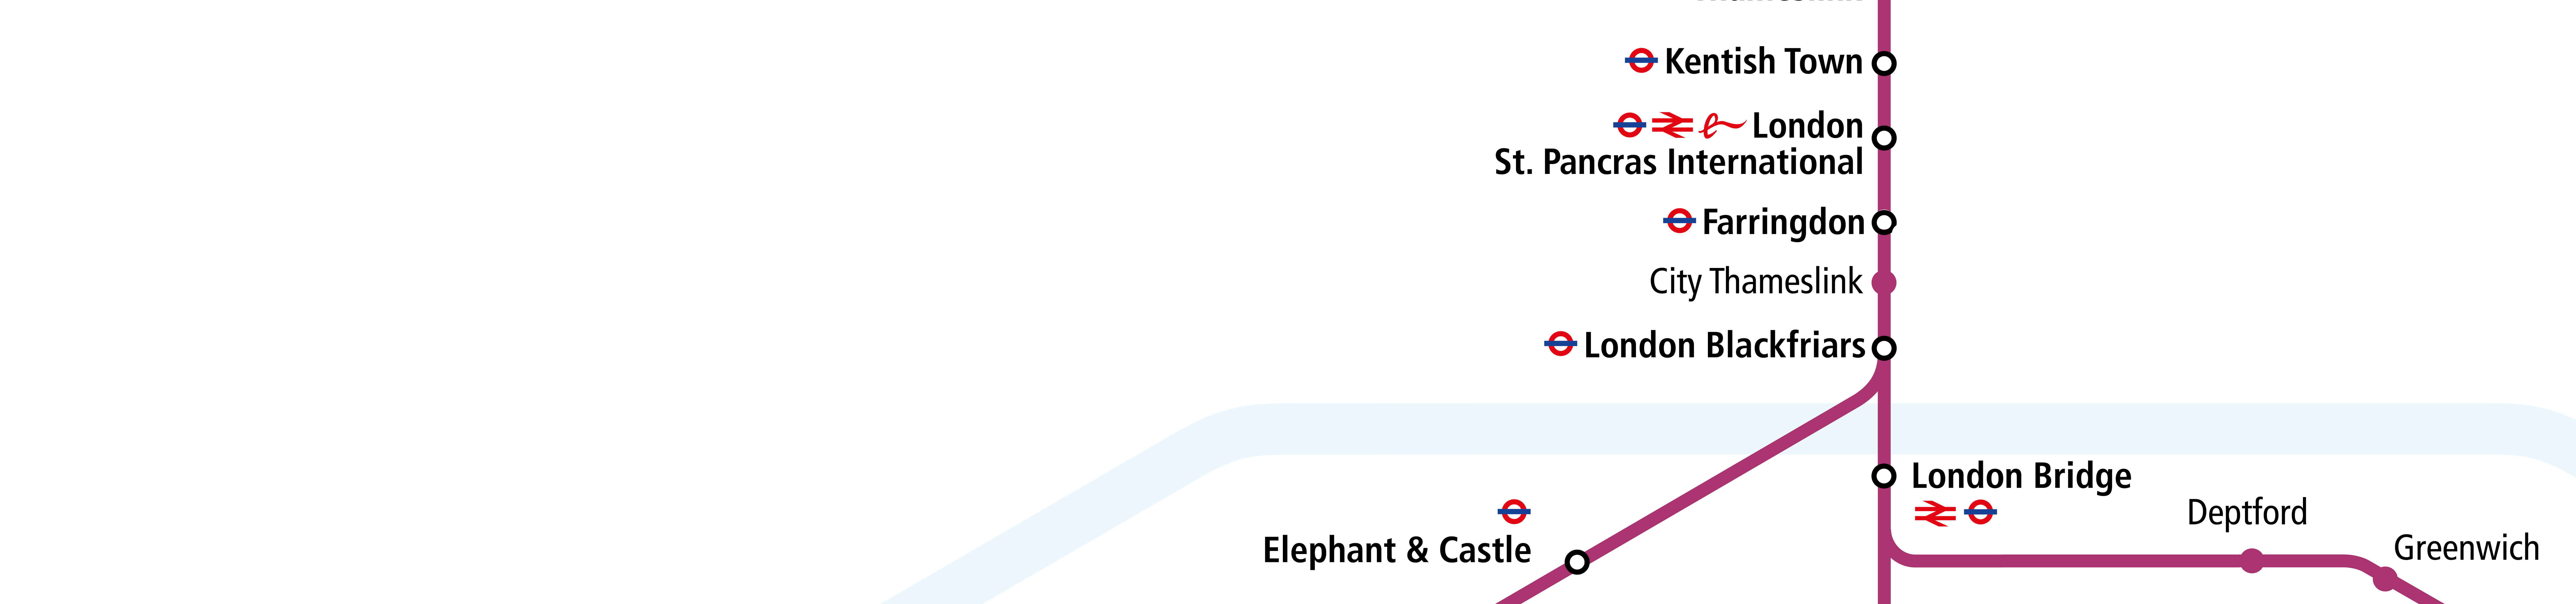 Downloadable route map for the Thameslink network